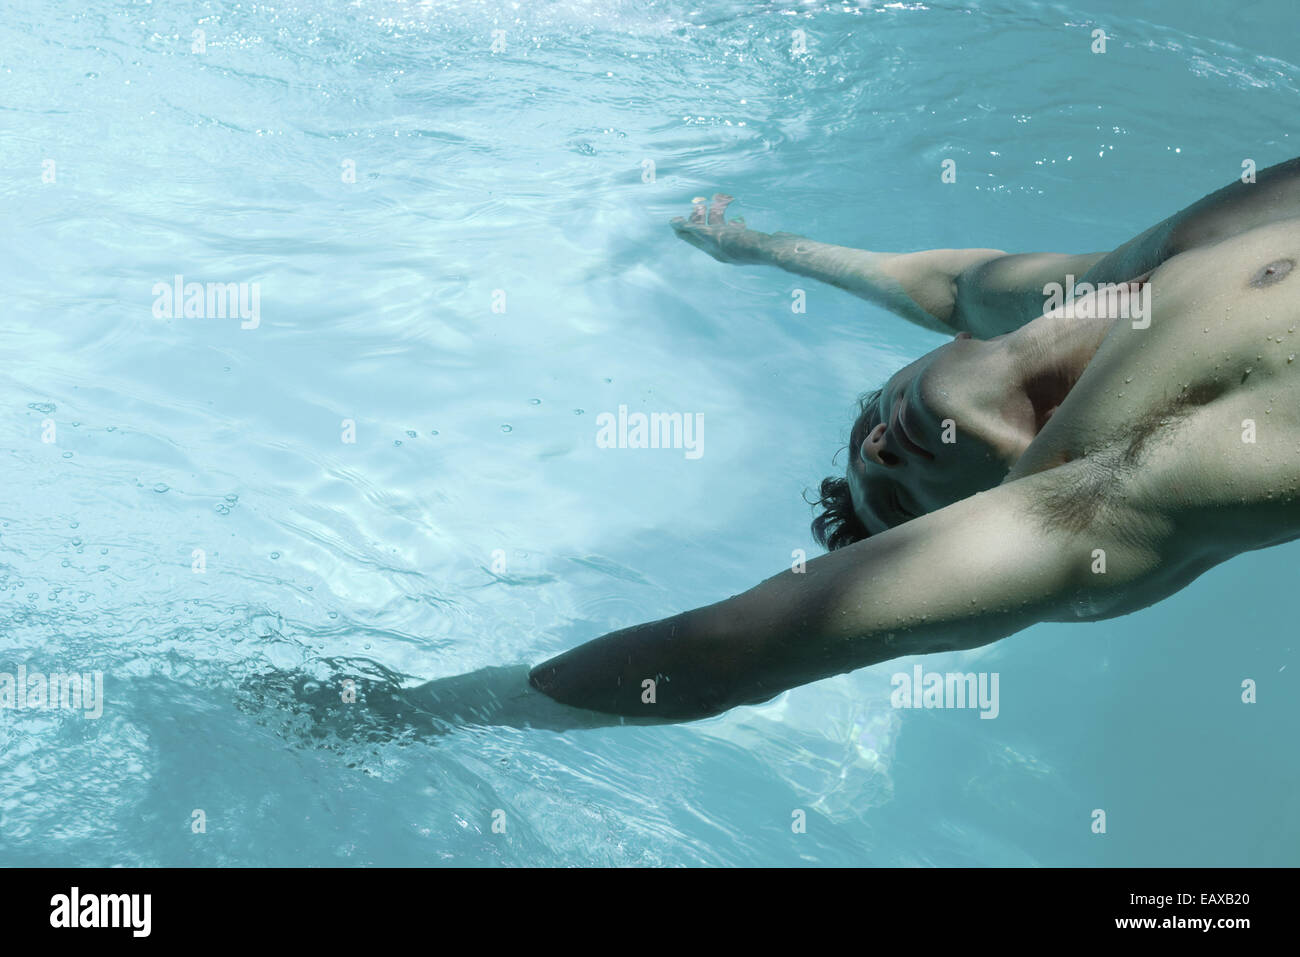 Man leaning backward over swimming pool, dangling arms in water Stock Photo